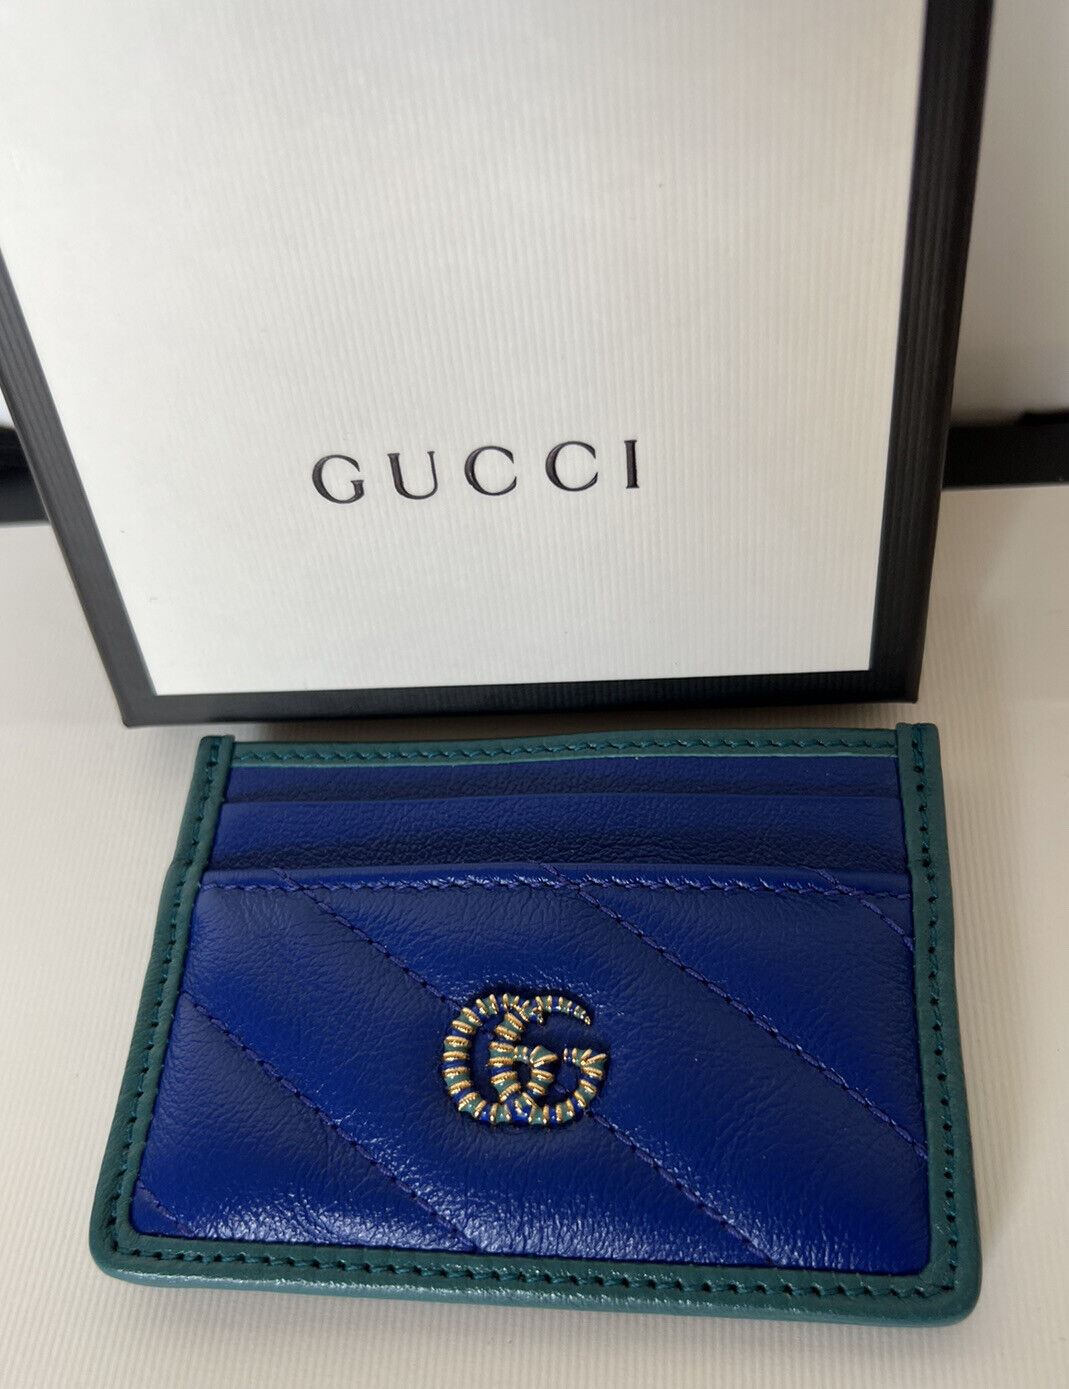 NIB Gucci GG Marmont Quilted Leather Blue/Green Card Holder Made in Italy 573812